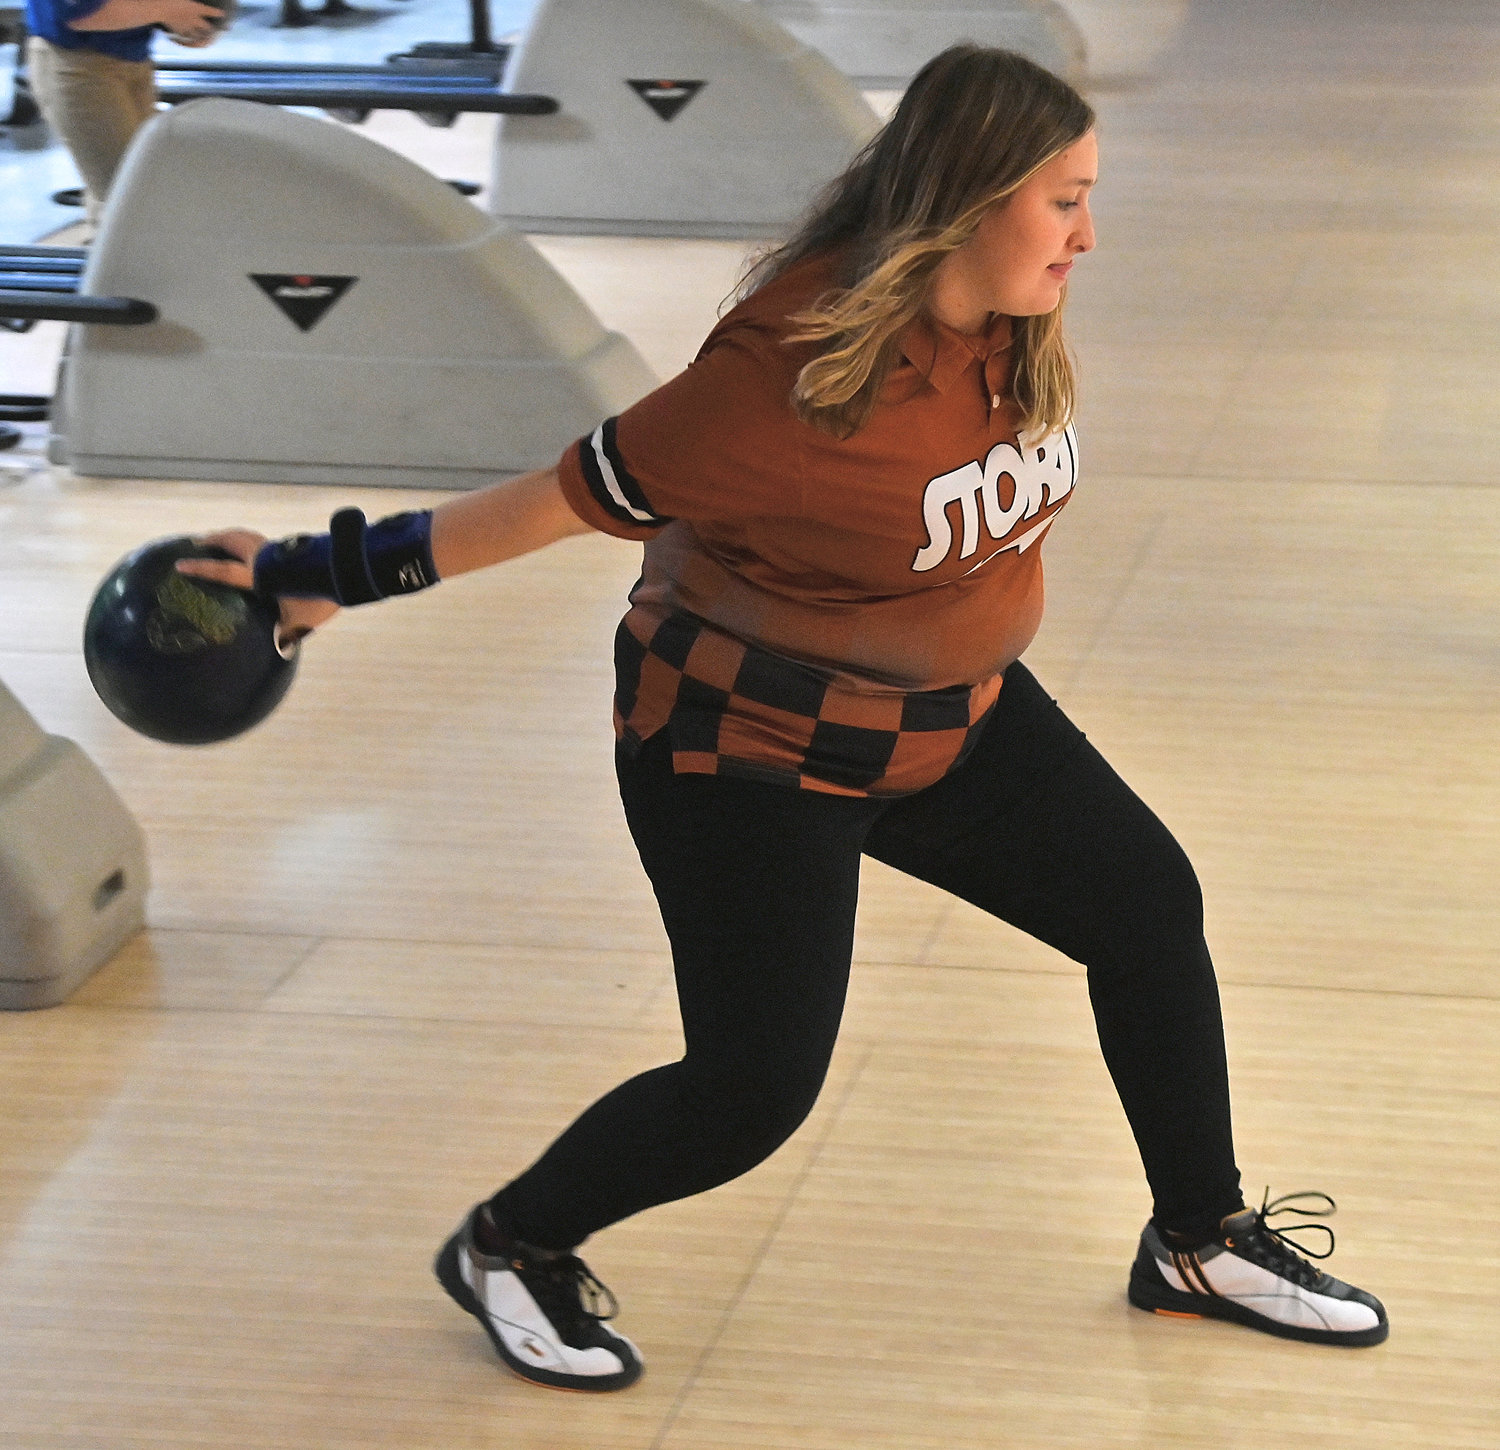 Rome Free Academy’s Hayley Taylor approaches the lane during the Black Knights’ match with Whitesboro on Wednesday afternoon at Vista Lanes. Results were not submitted.